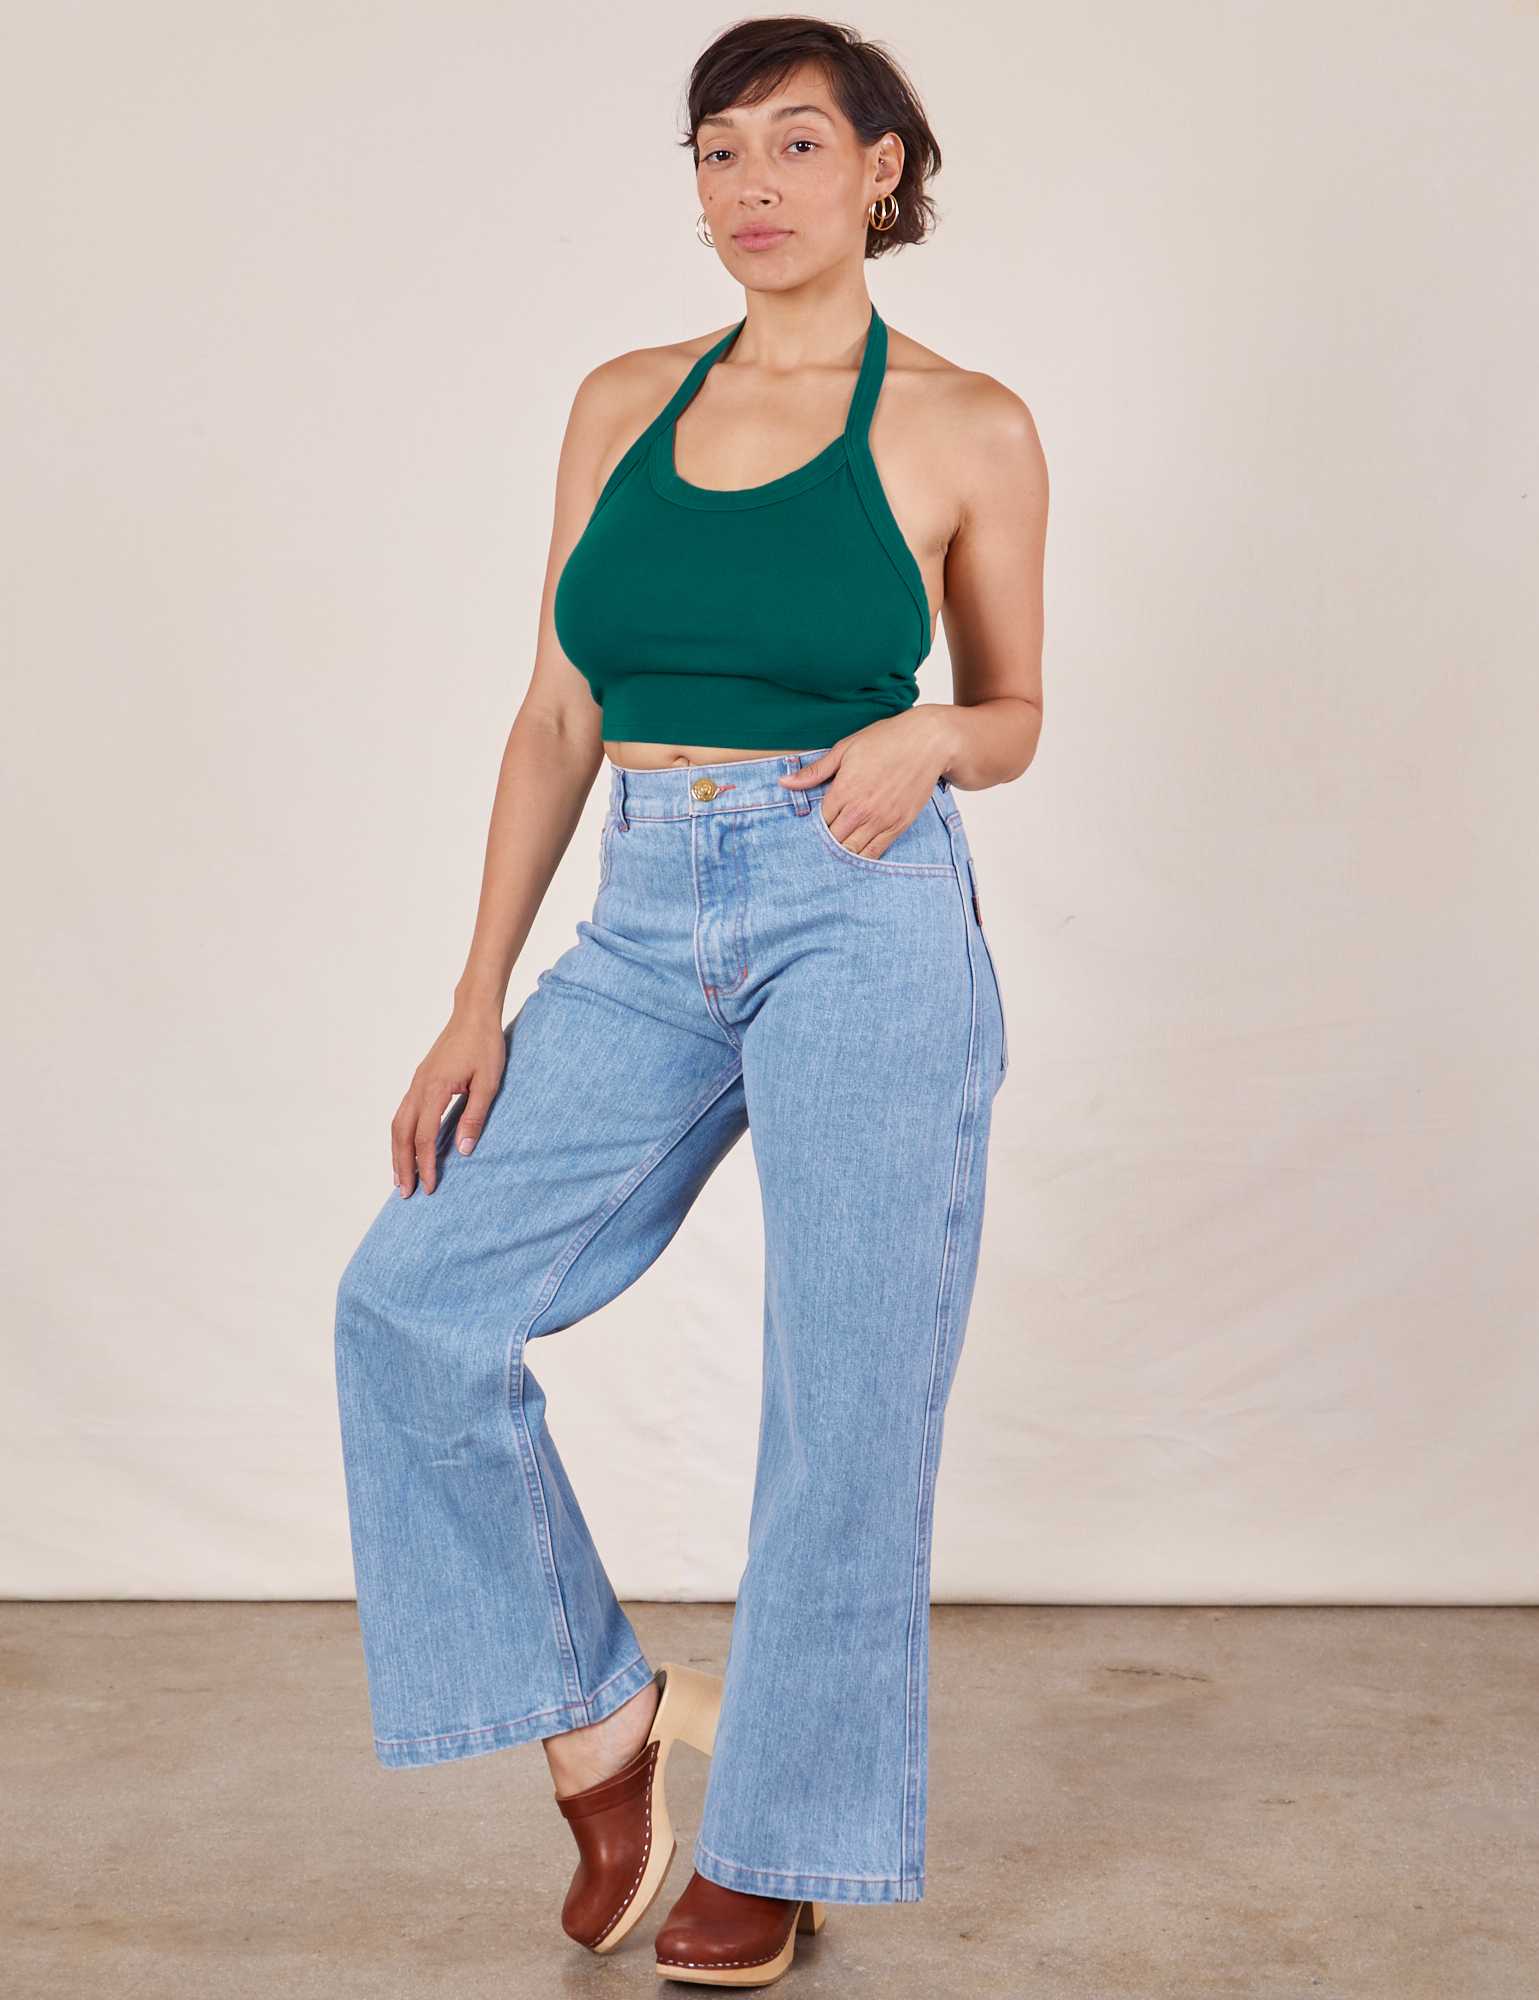 Tiara is wearing Halter Top in Hunter Green and light wash Sailor Jeans